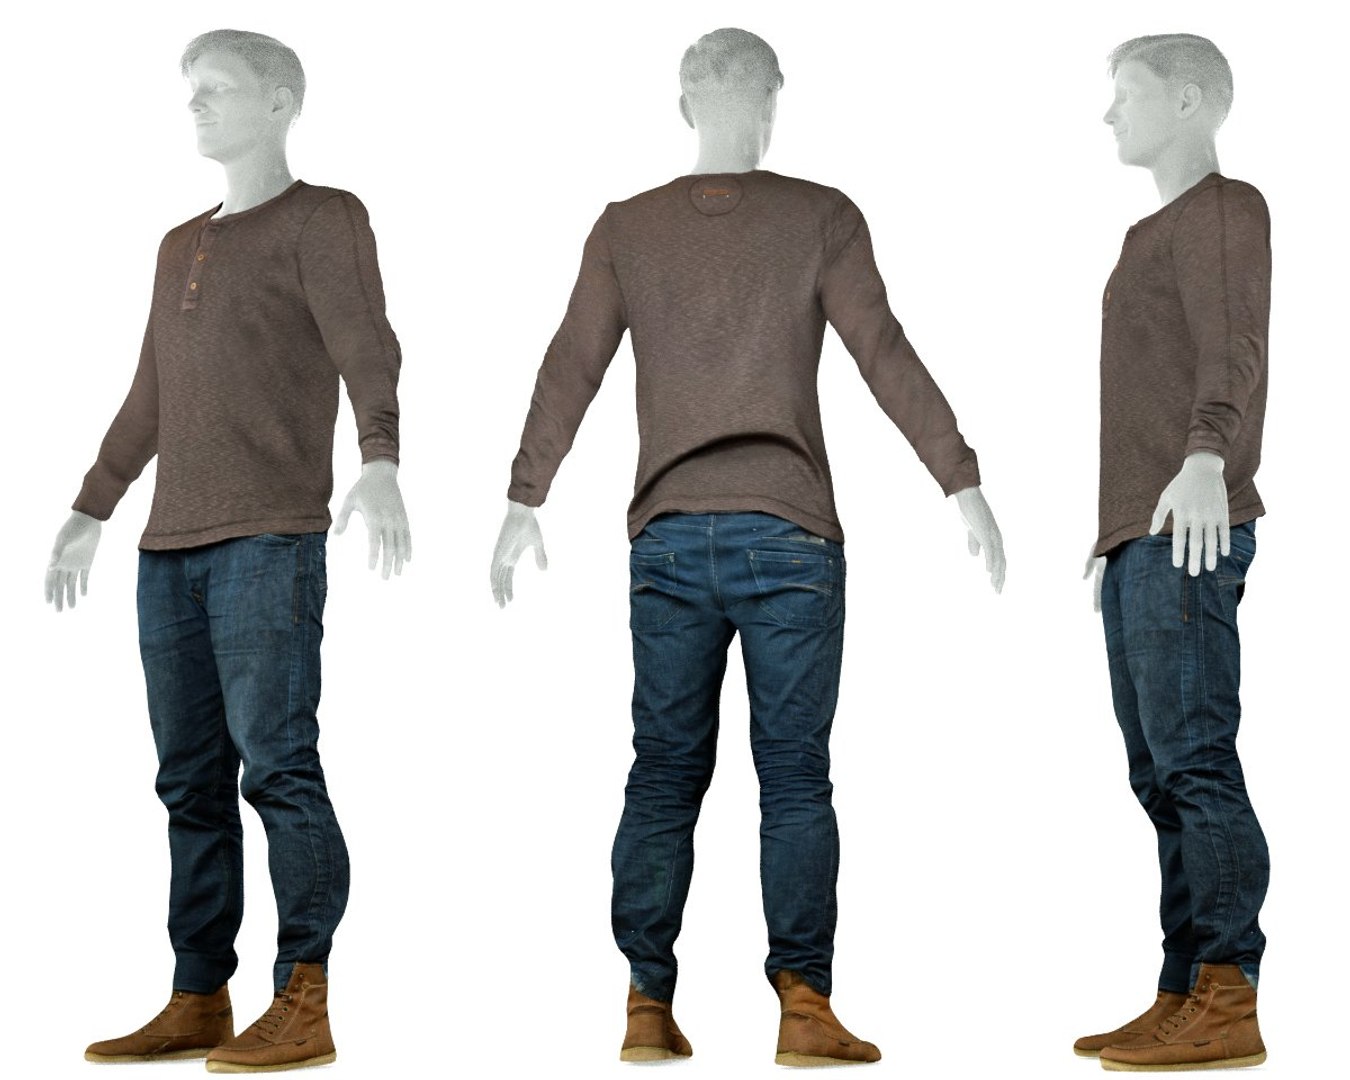 3D Male Clothing Outfit - TurboSquid 1329715